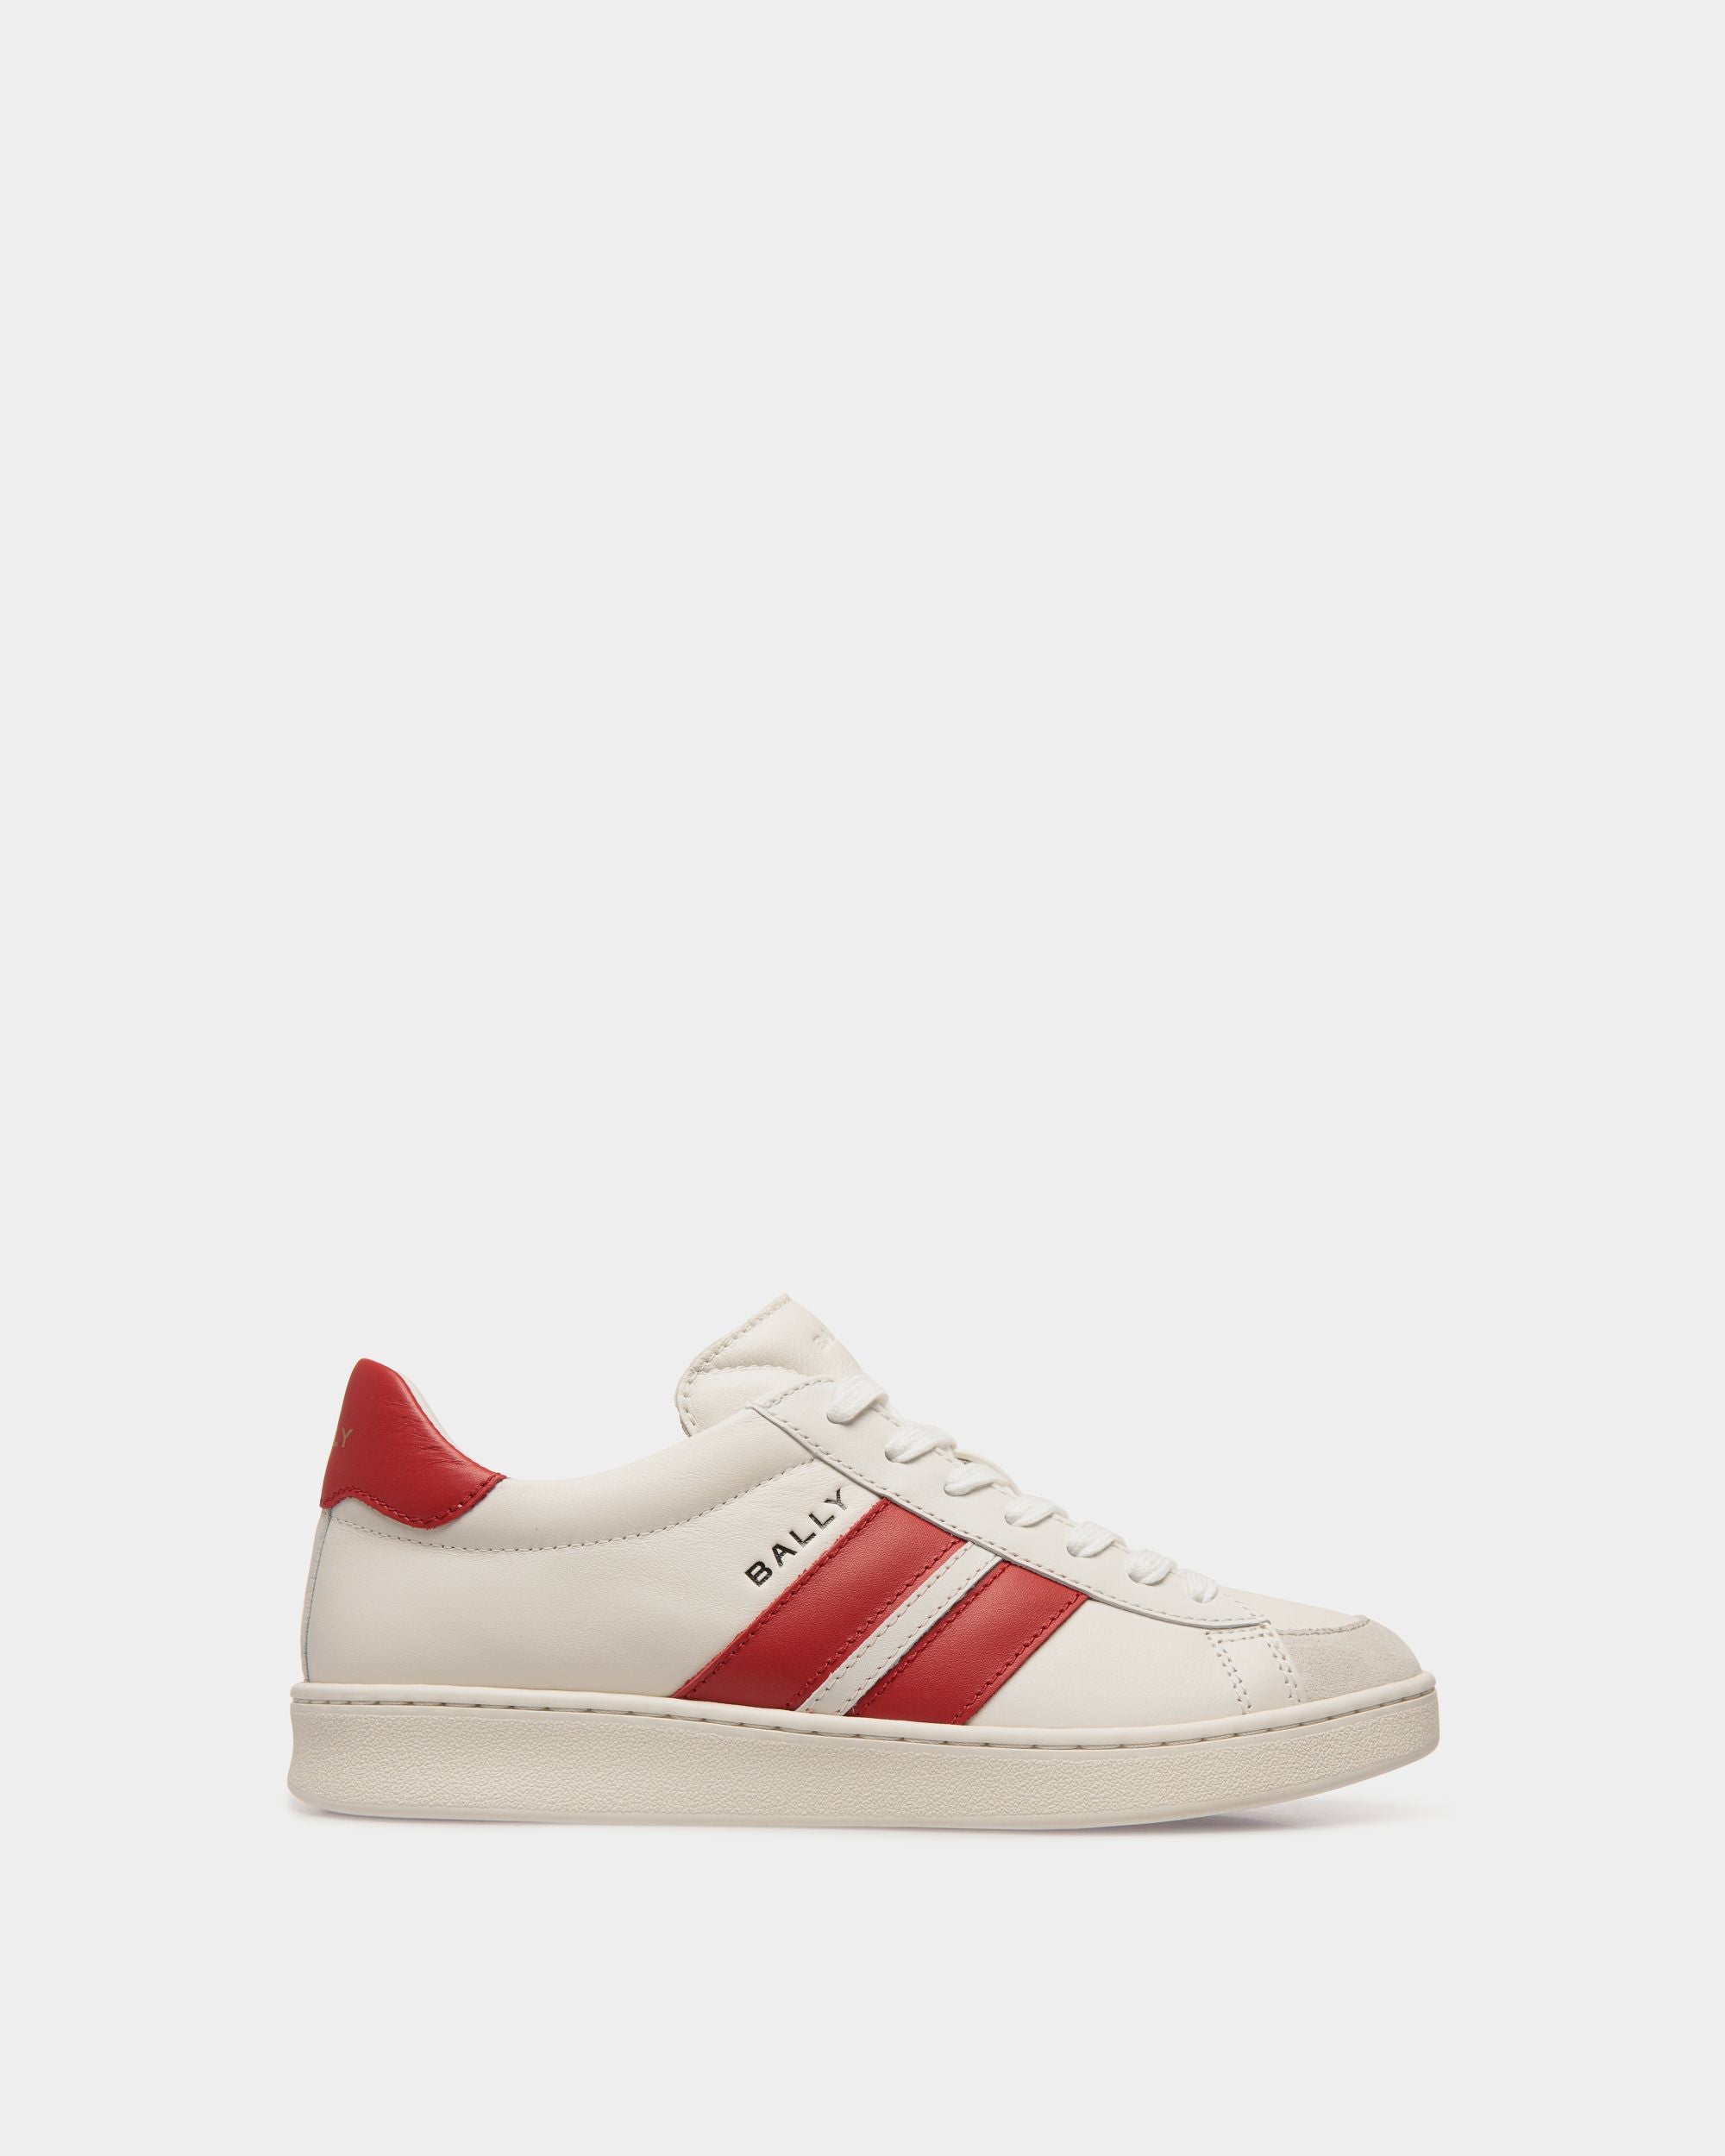 Women's Tennis Sneaker in White and Candy Red Leather | Bally | Still Life Side